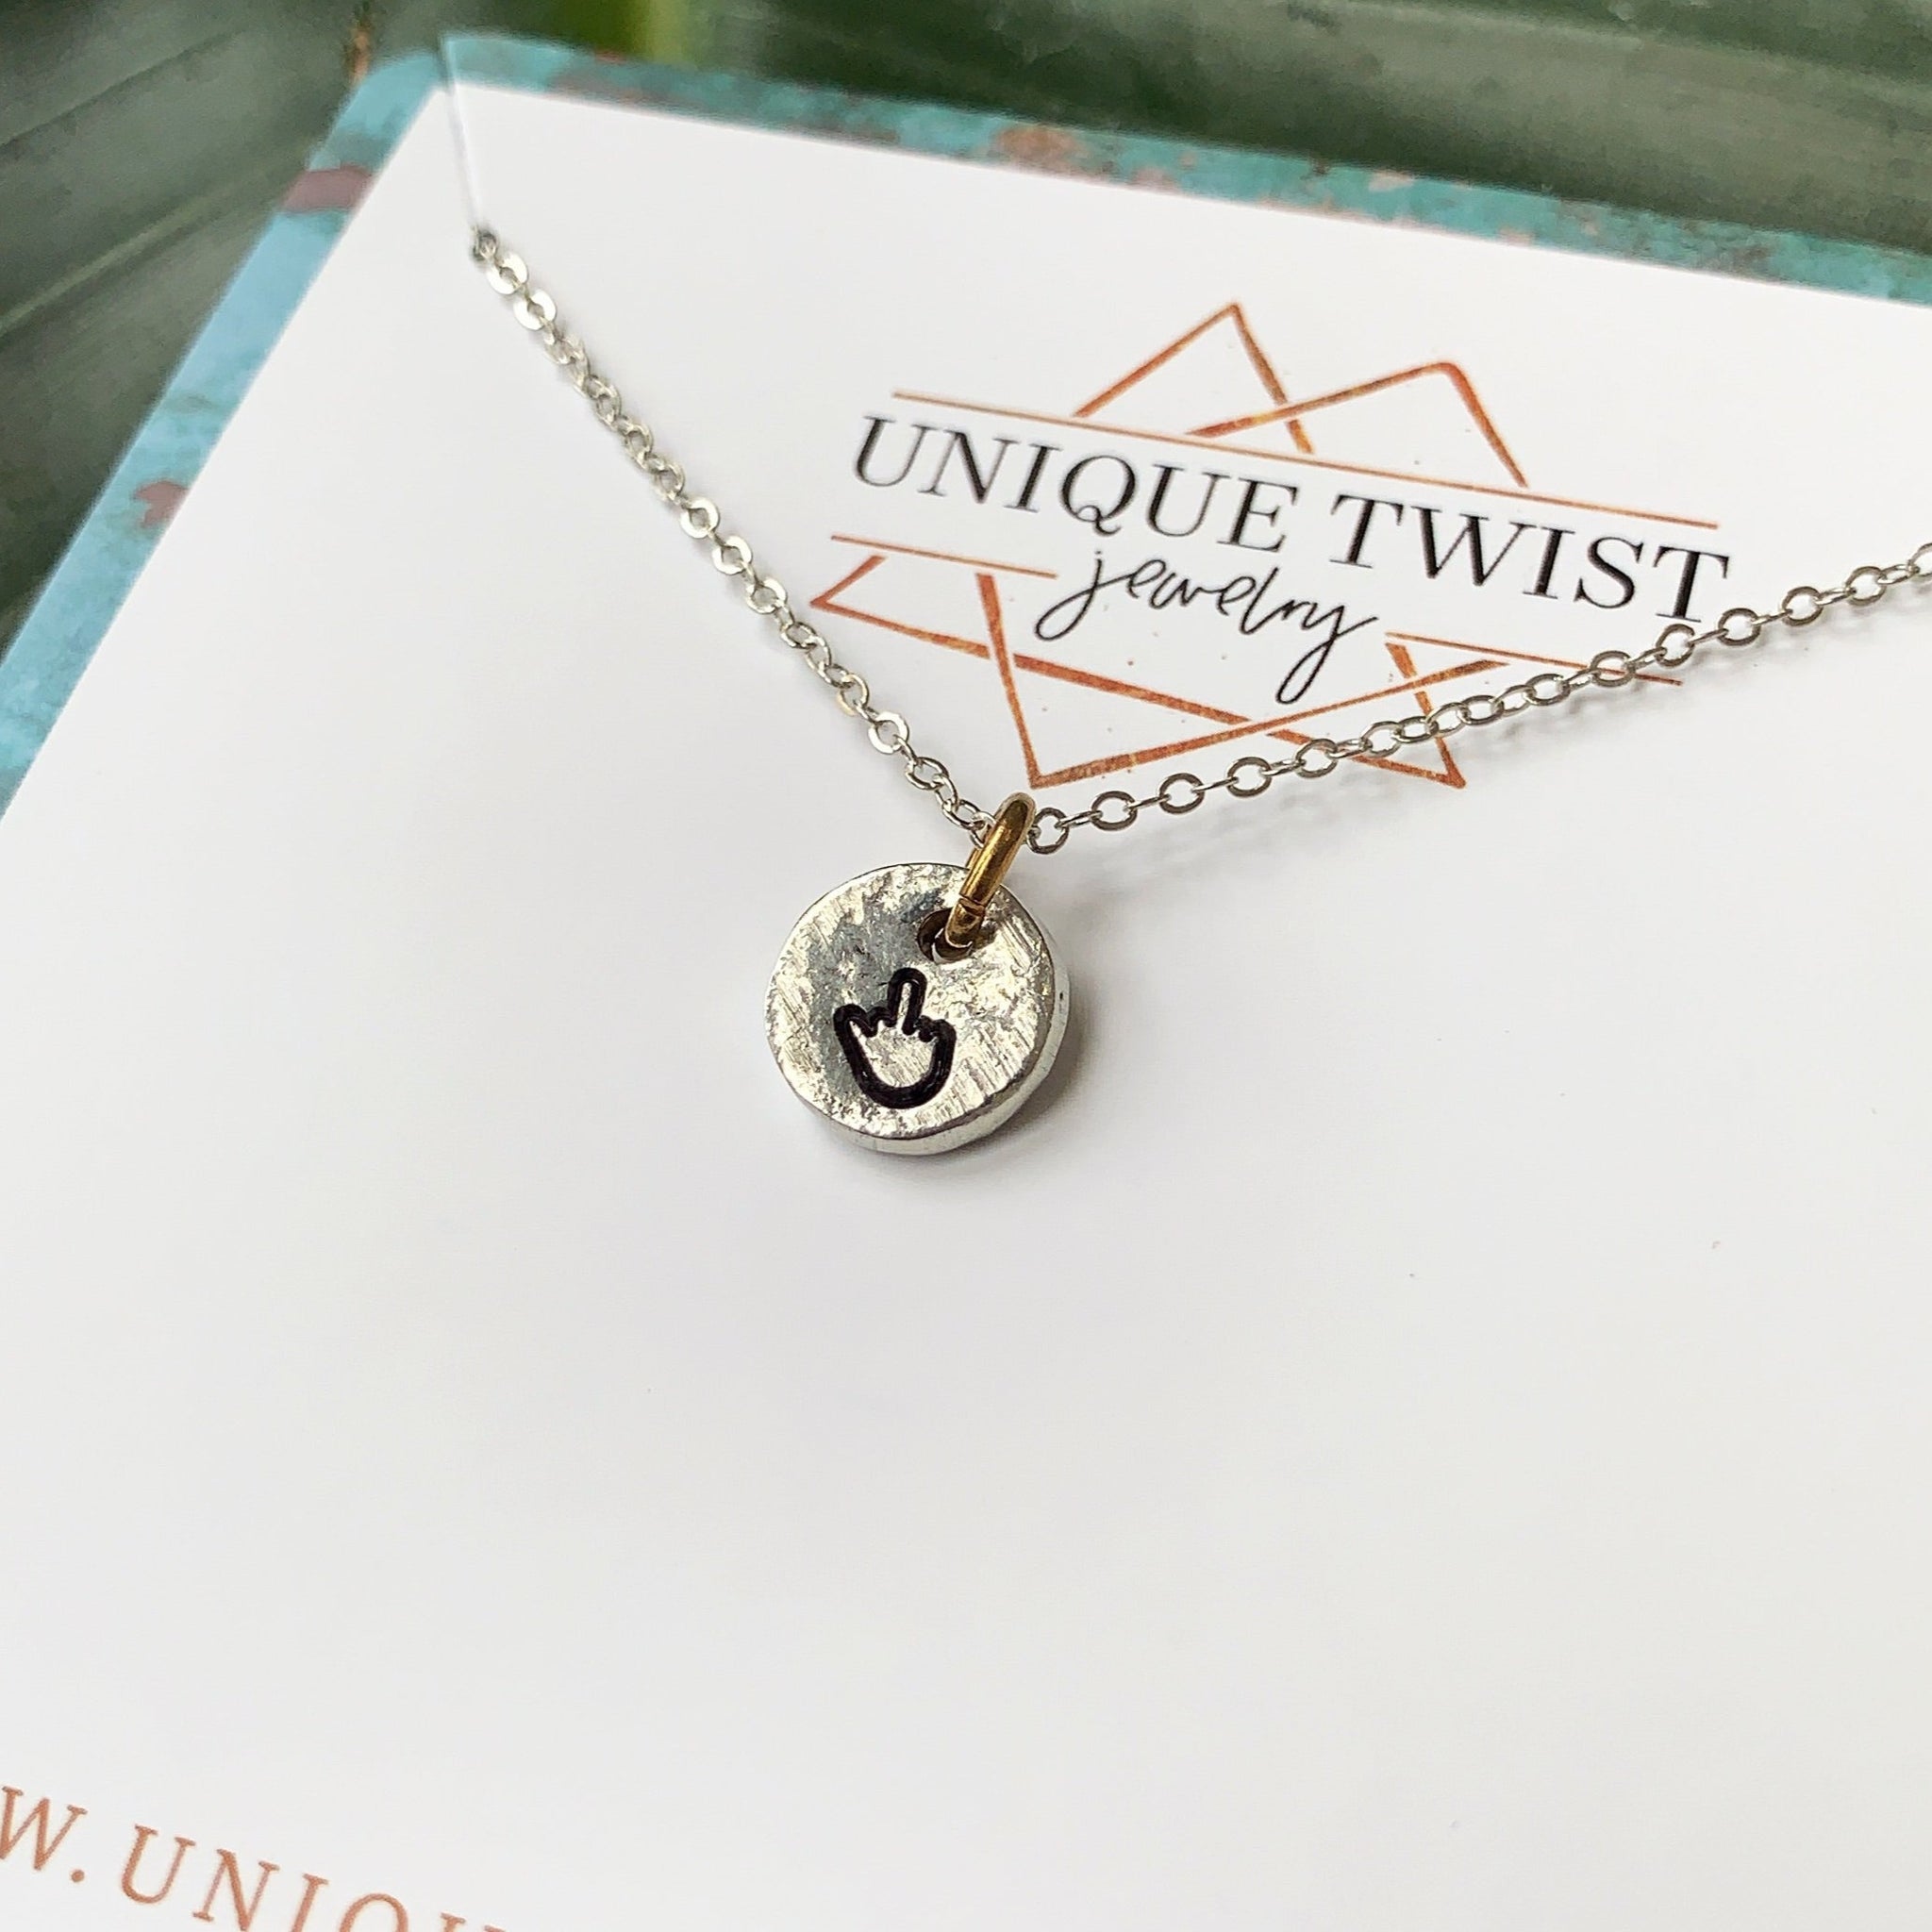 Give em the bird aluminum hand-stamped necklace. Handmade jewelry by Unique Twist Jewelry.